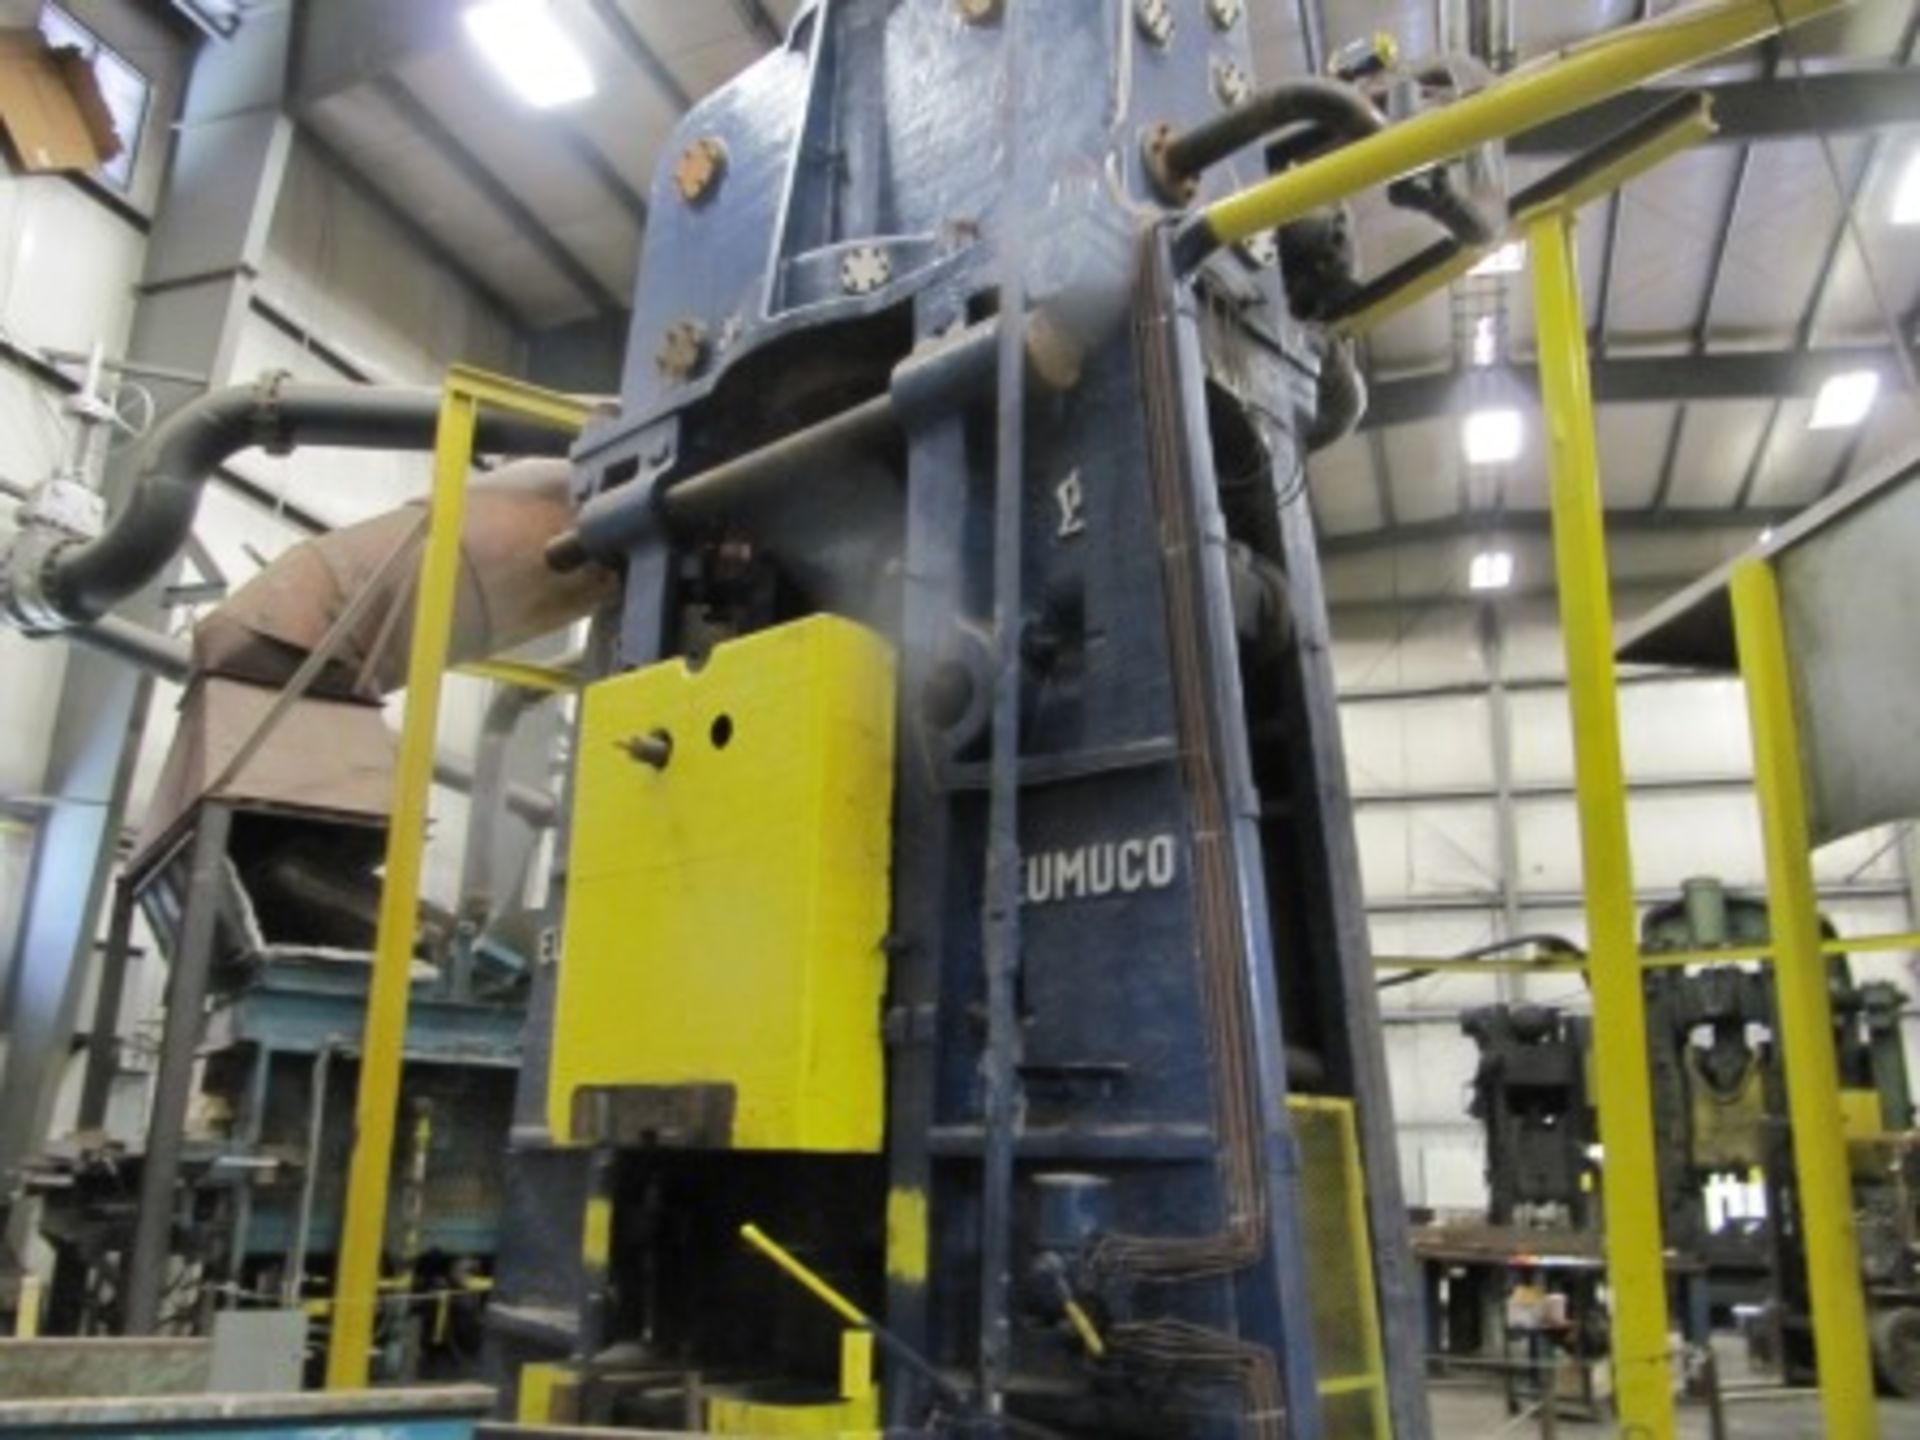 EUMUCO 2,200-TON COUNTER BLOW FORGING HAMMER, 98"X46" APPROX. 45,000# W/RAM, PLATES, ETC. (BLDG. 2) - Image 2 of 9